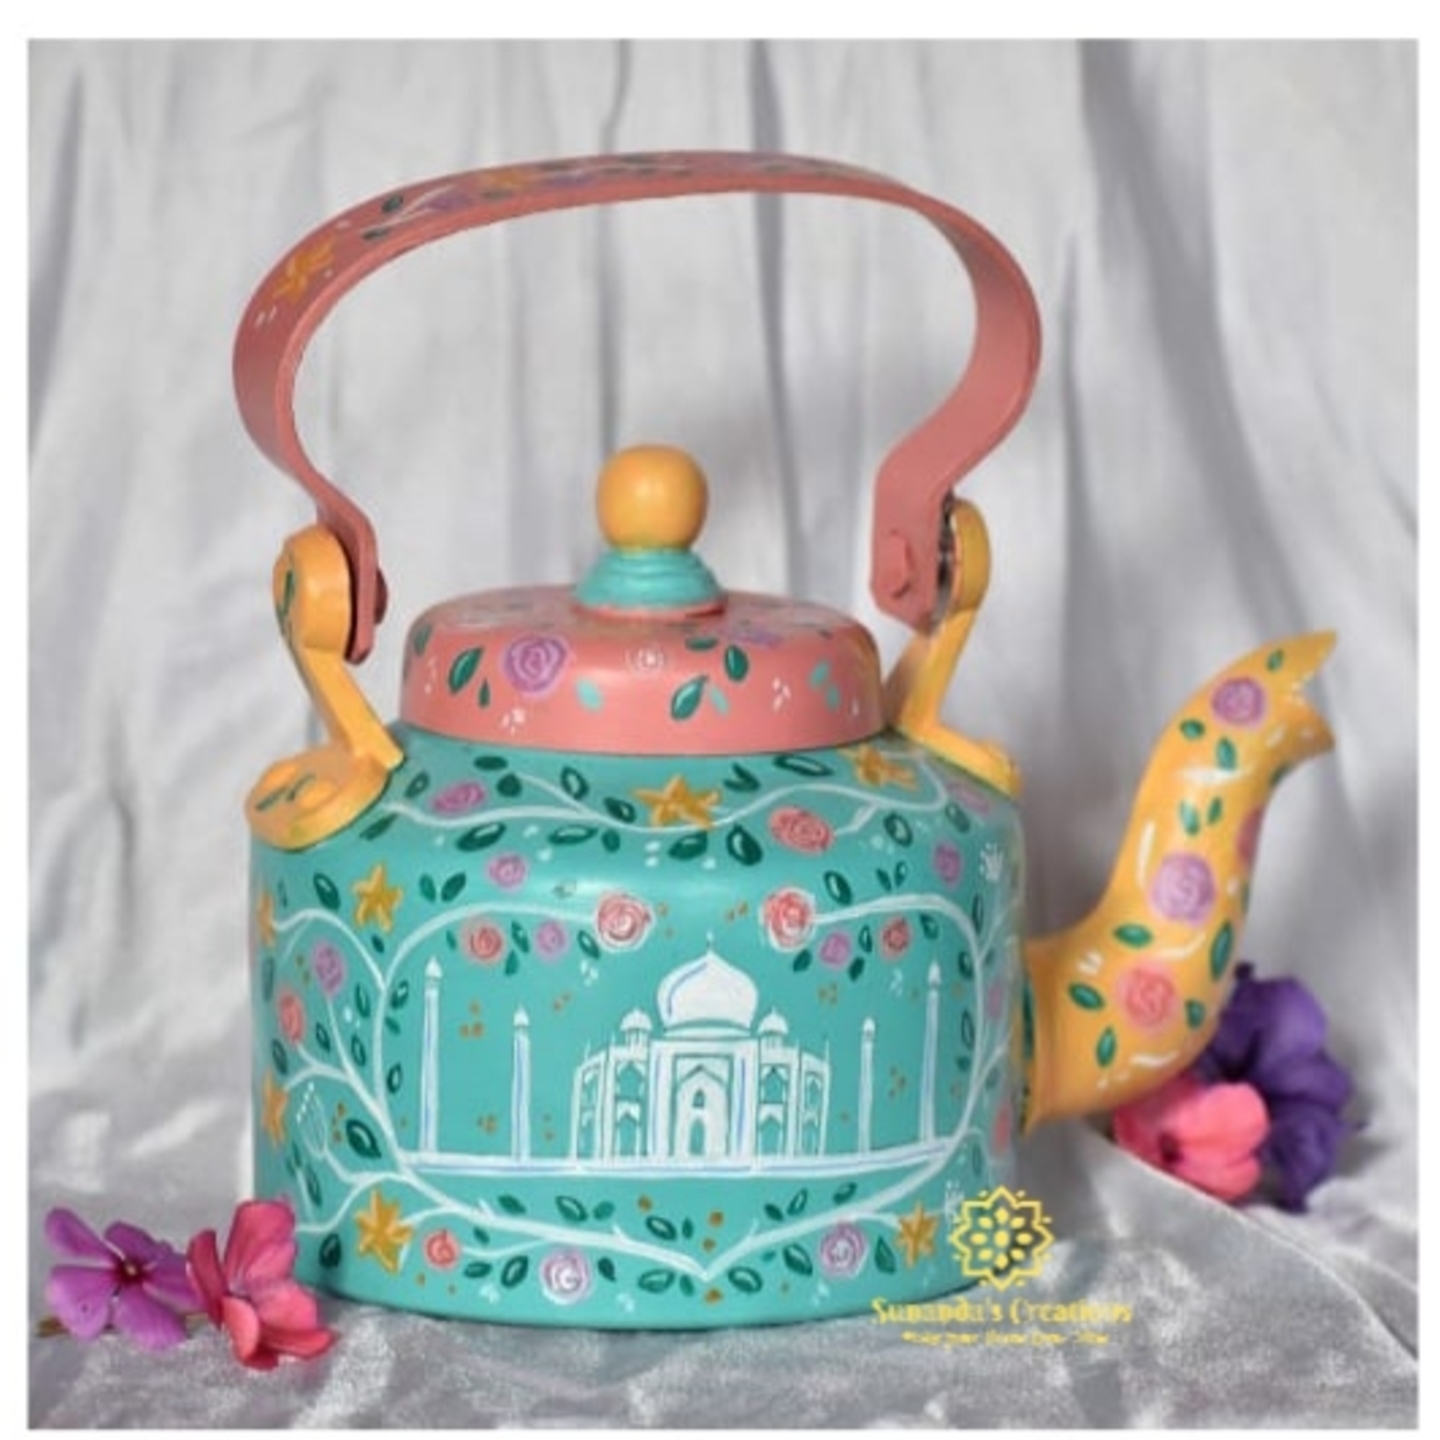 Tajmahal designed Hand painted Kettle Teal Blue & Baby Pink